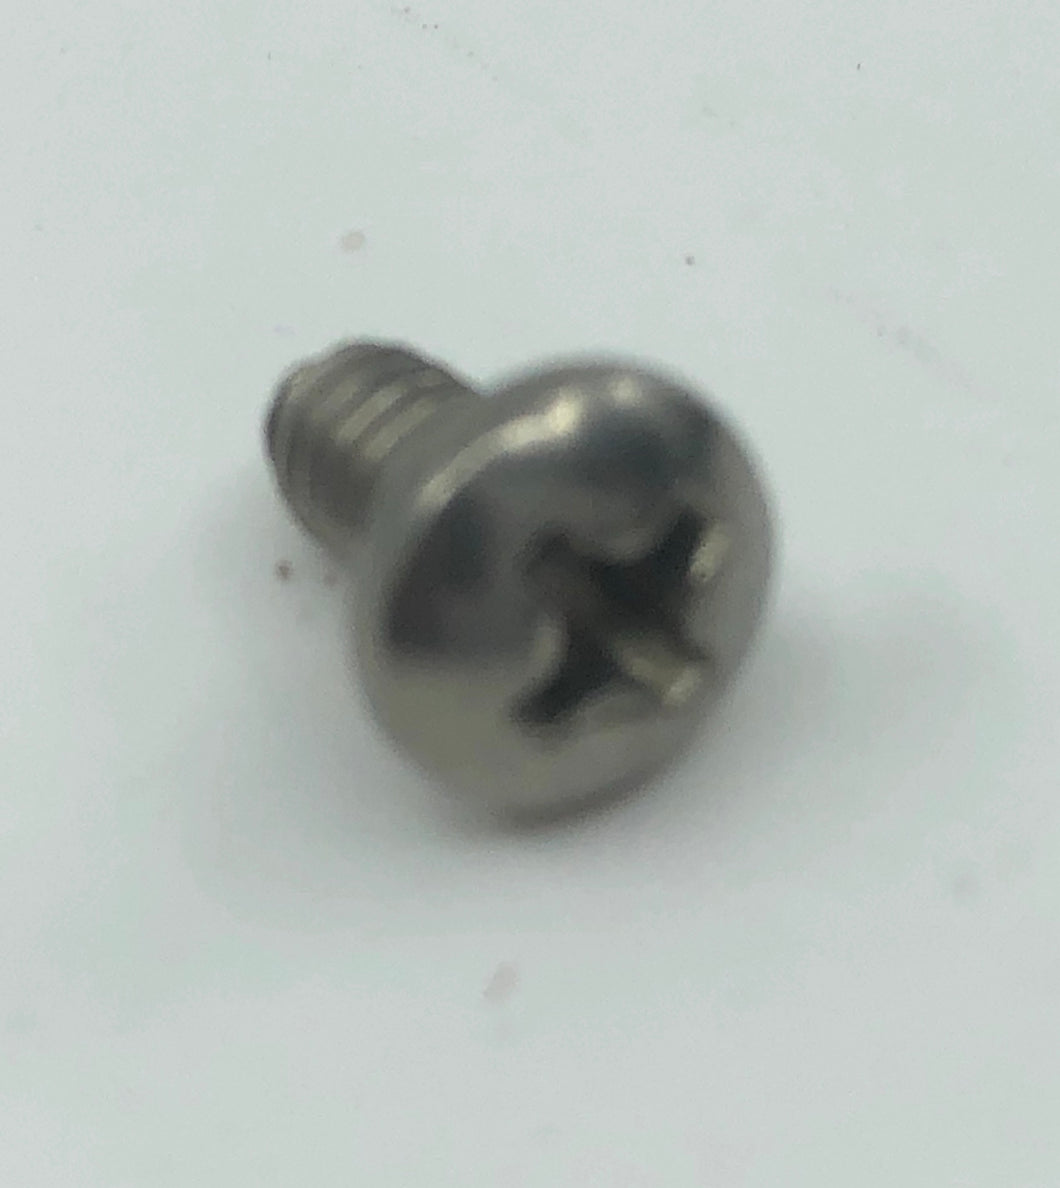 Oceanic Screw for a Buckle 712904